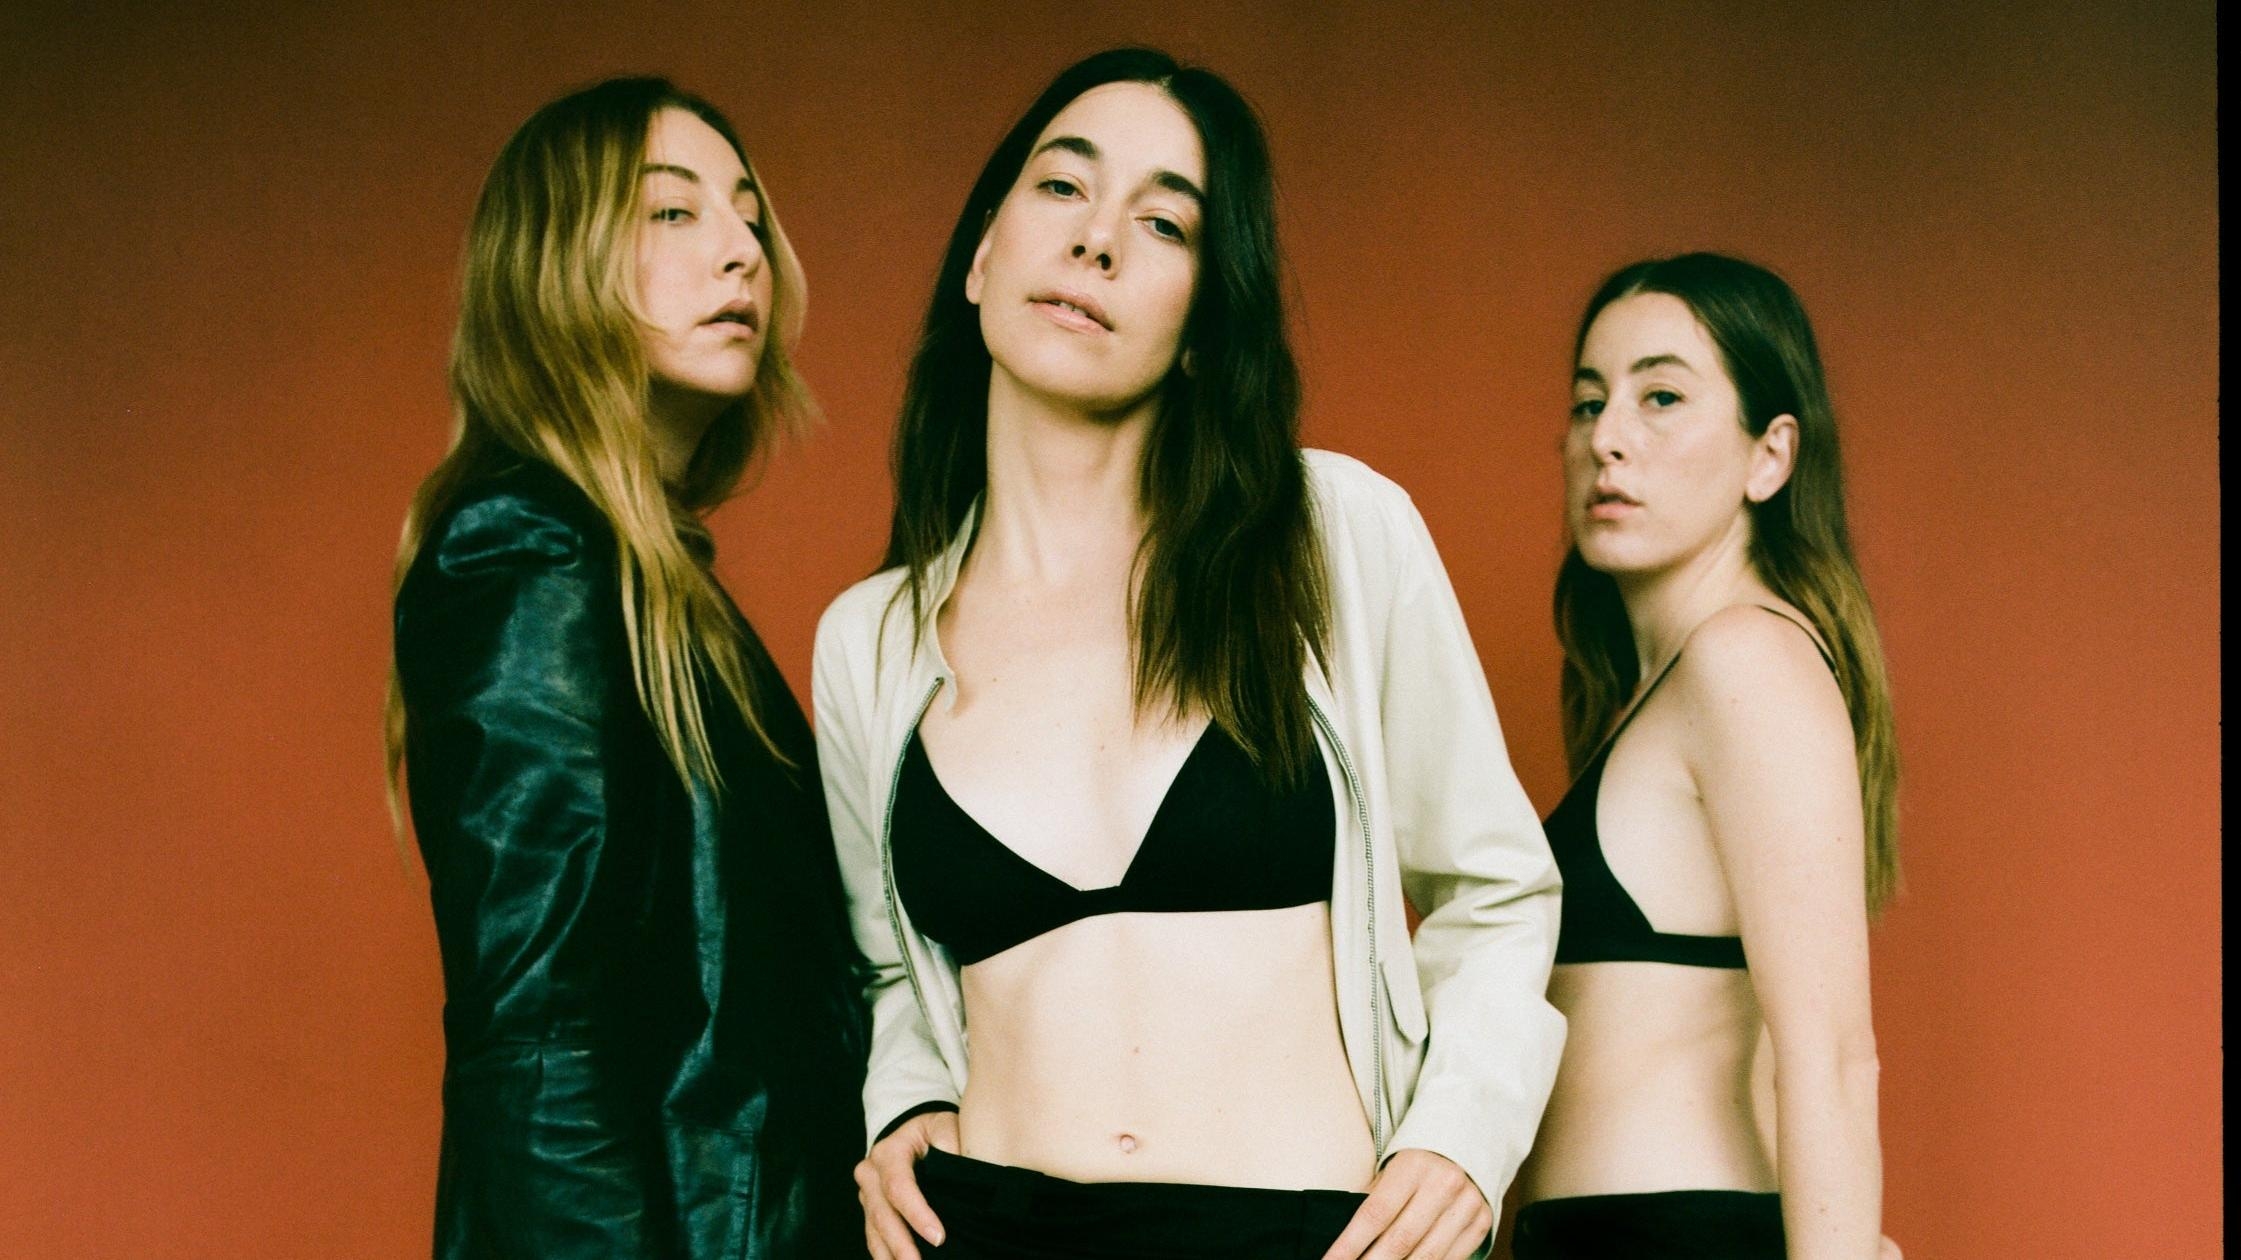 The HAIM sisters are saddling up for a U.S. tour